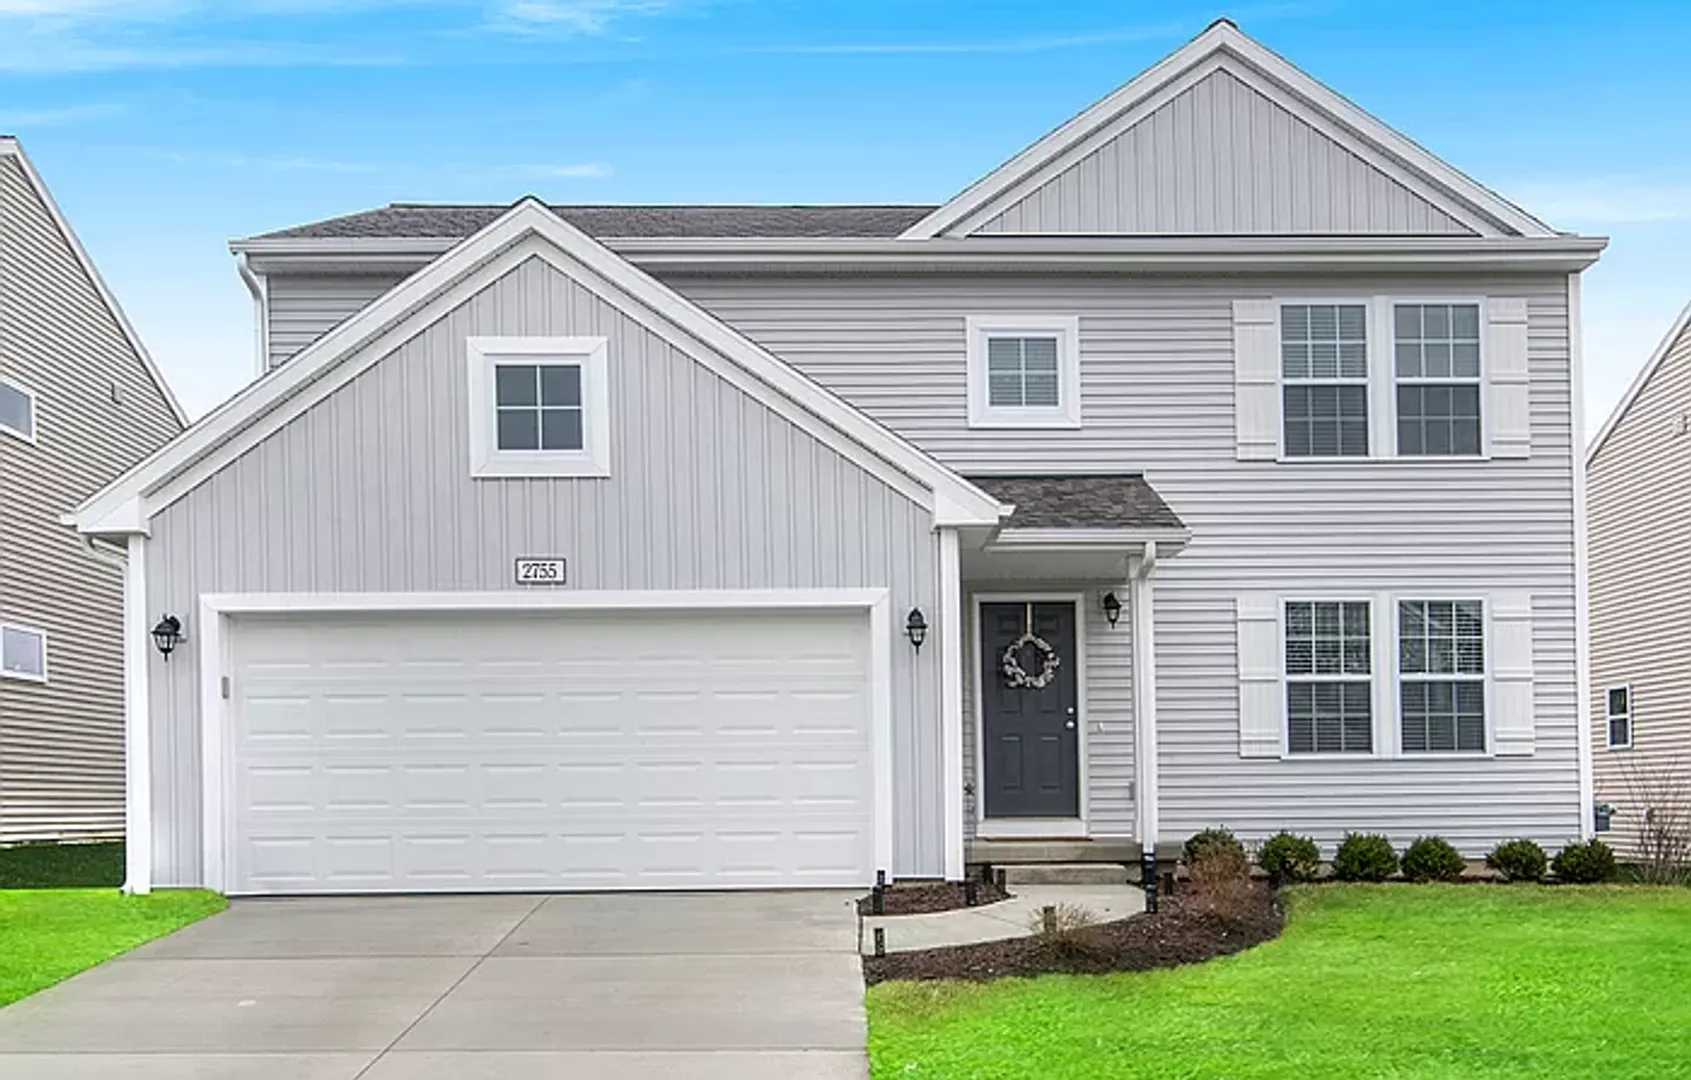 Houses Near Cleary University Incredible Immediate Occupancy Opportunity!  for Cleary University Students in Howell, MI